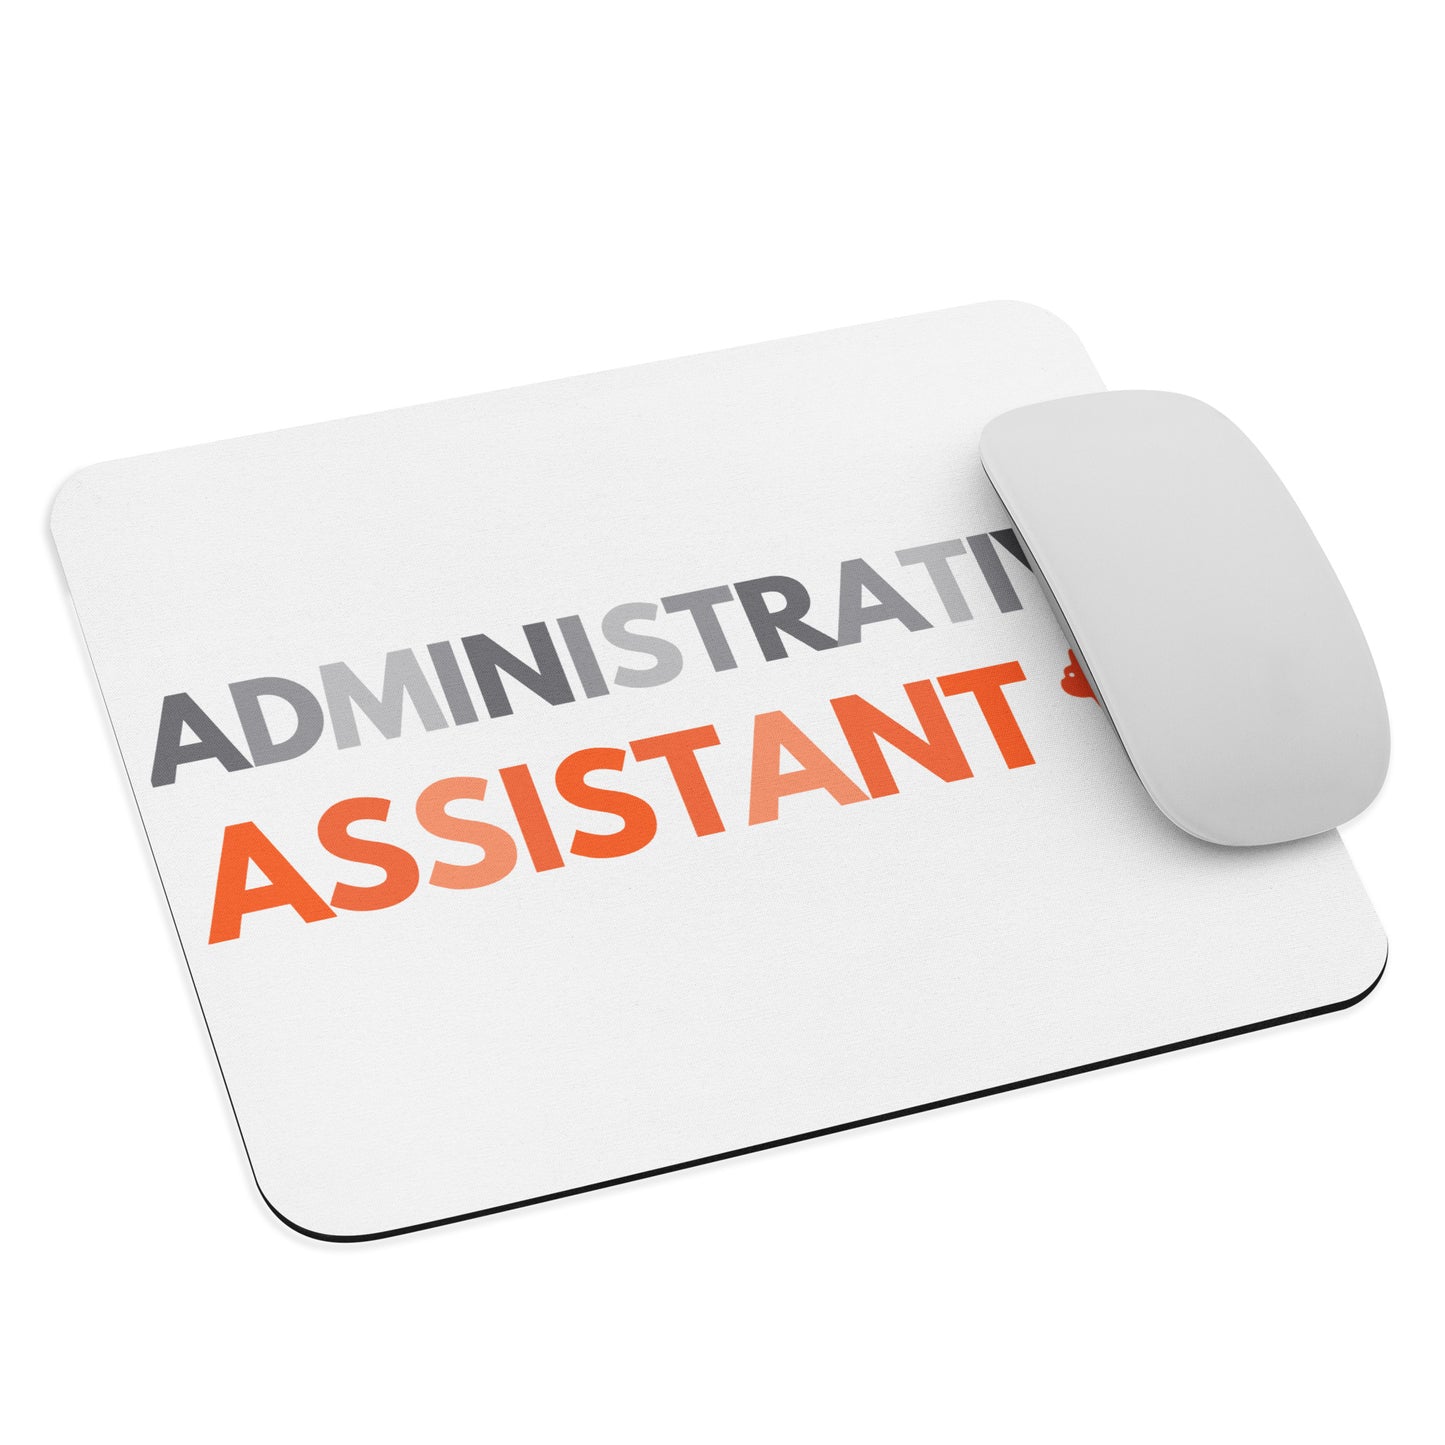 Administrative Assistant Mouse pad